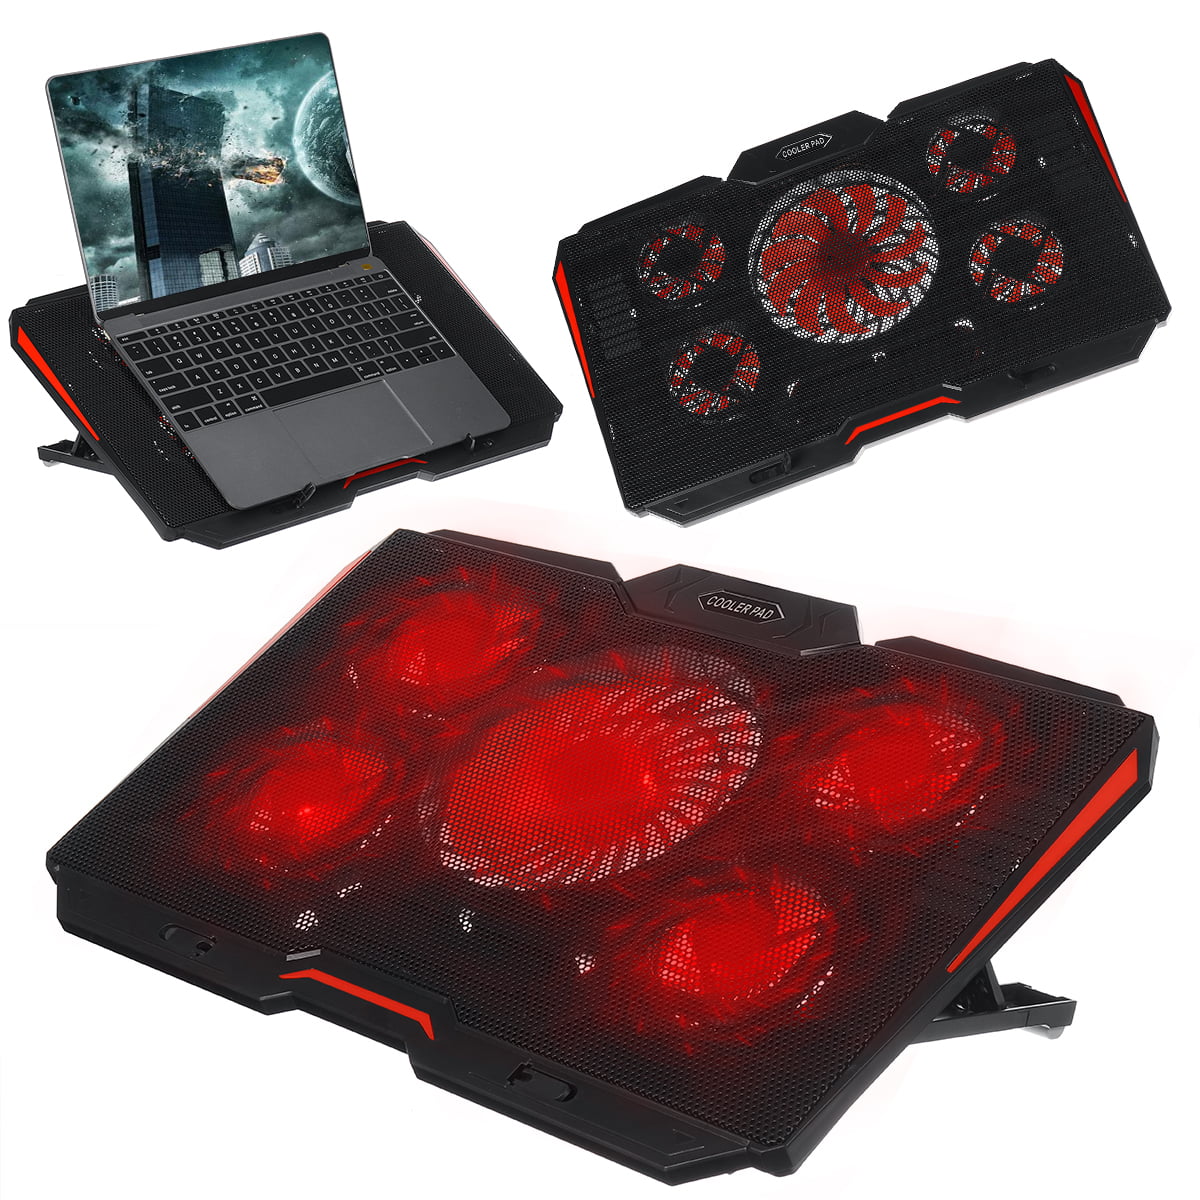 5Cooling Fan Laptop Cooling Pad Notebook Stand For 10-17 inch fixture for Laptop 